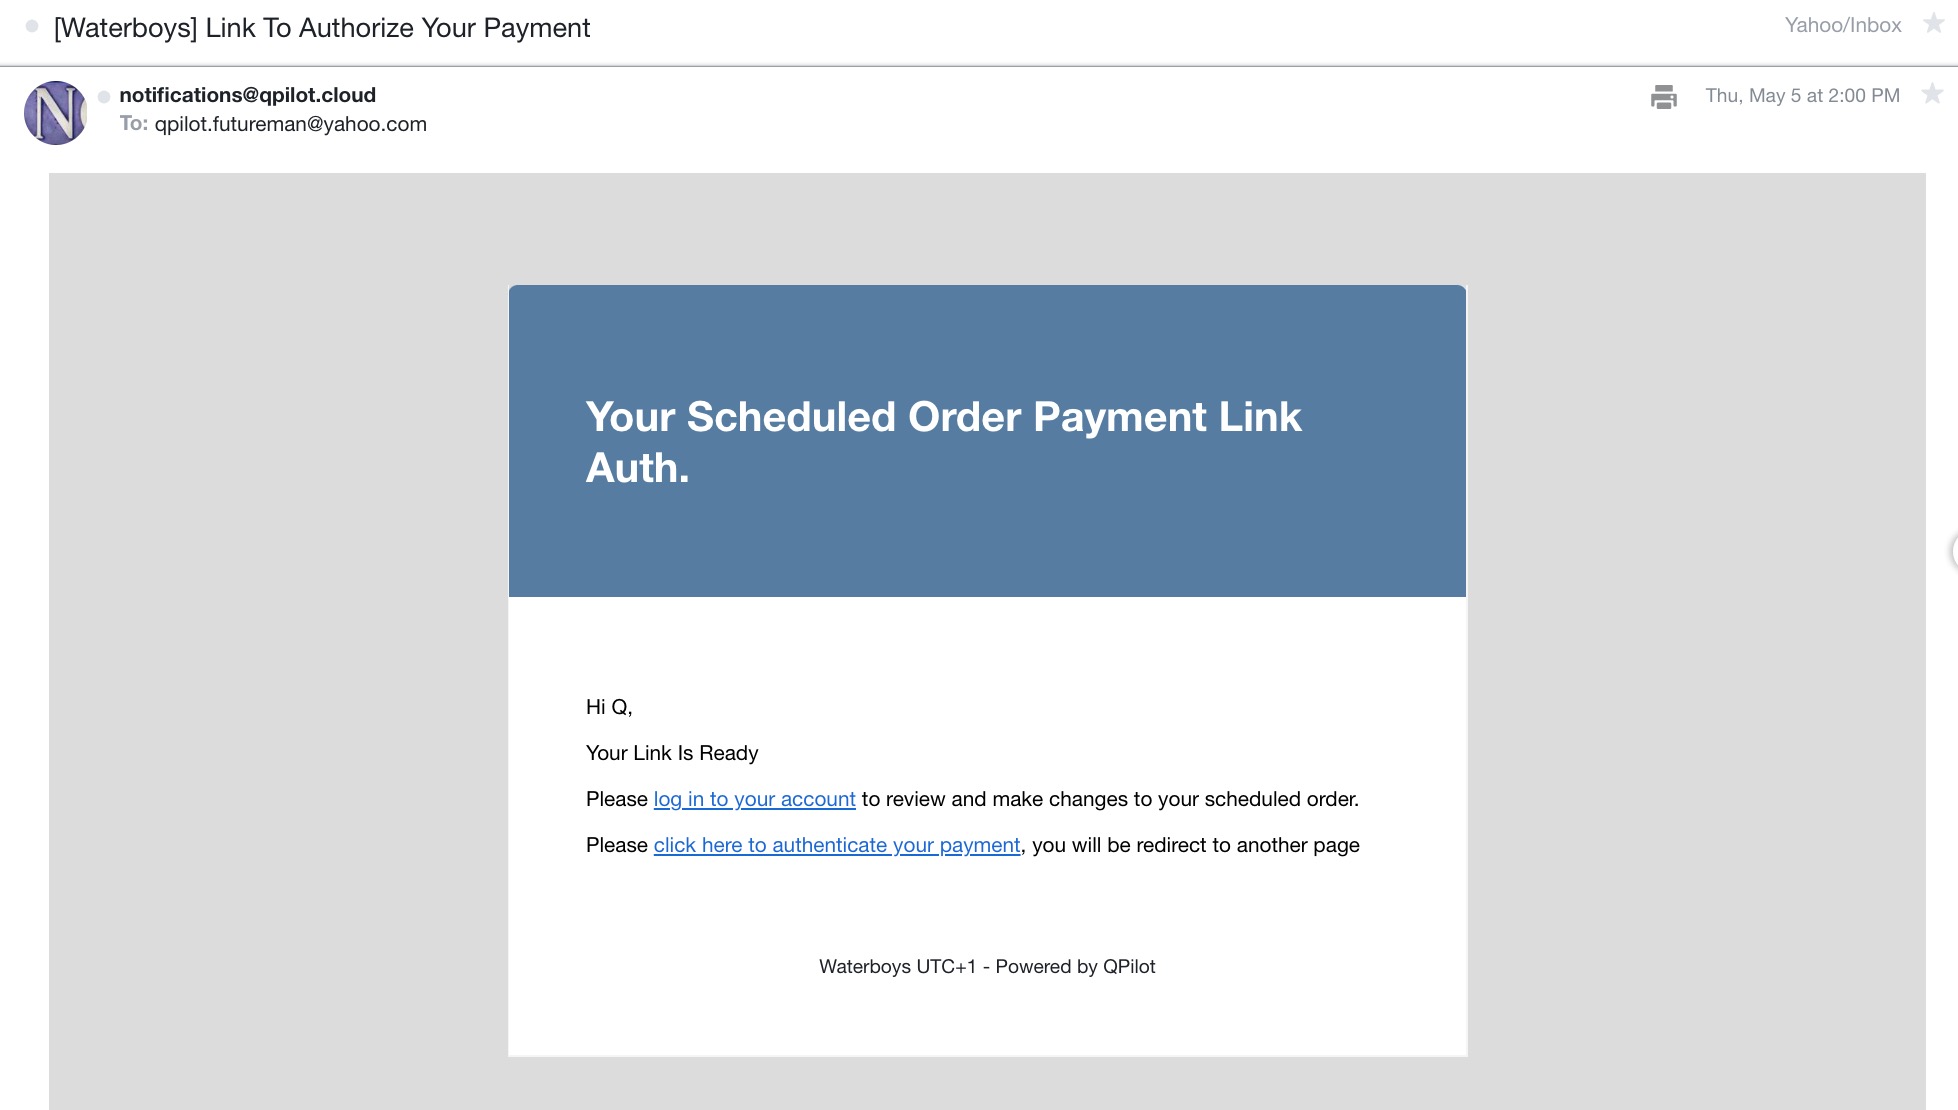 An email is sent to the Customer requesting them to authenticate their payment method.